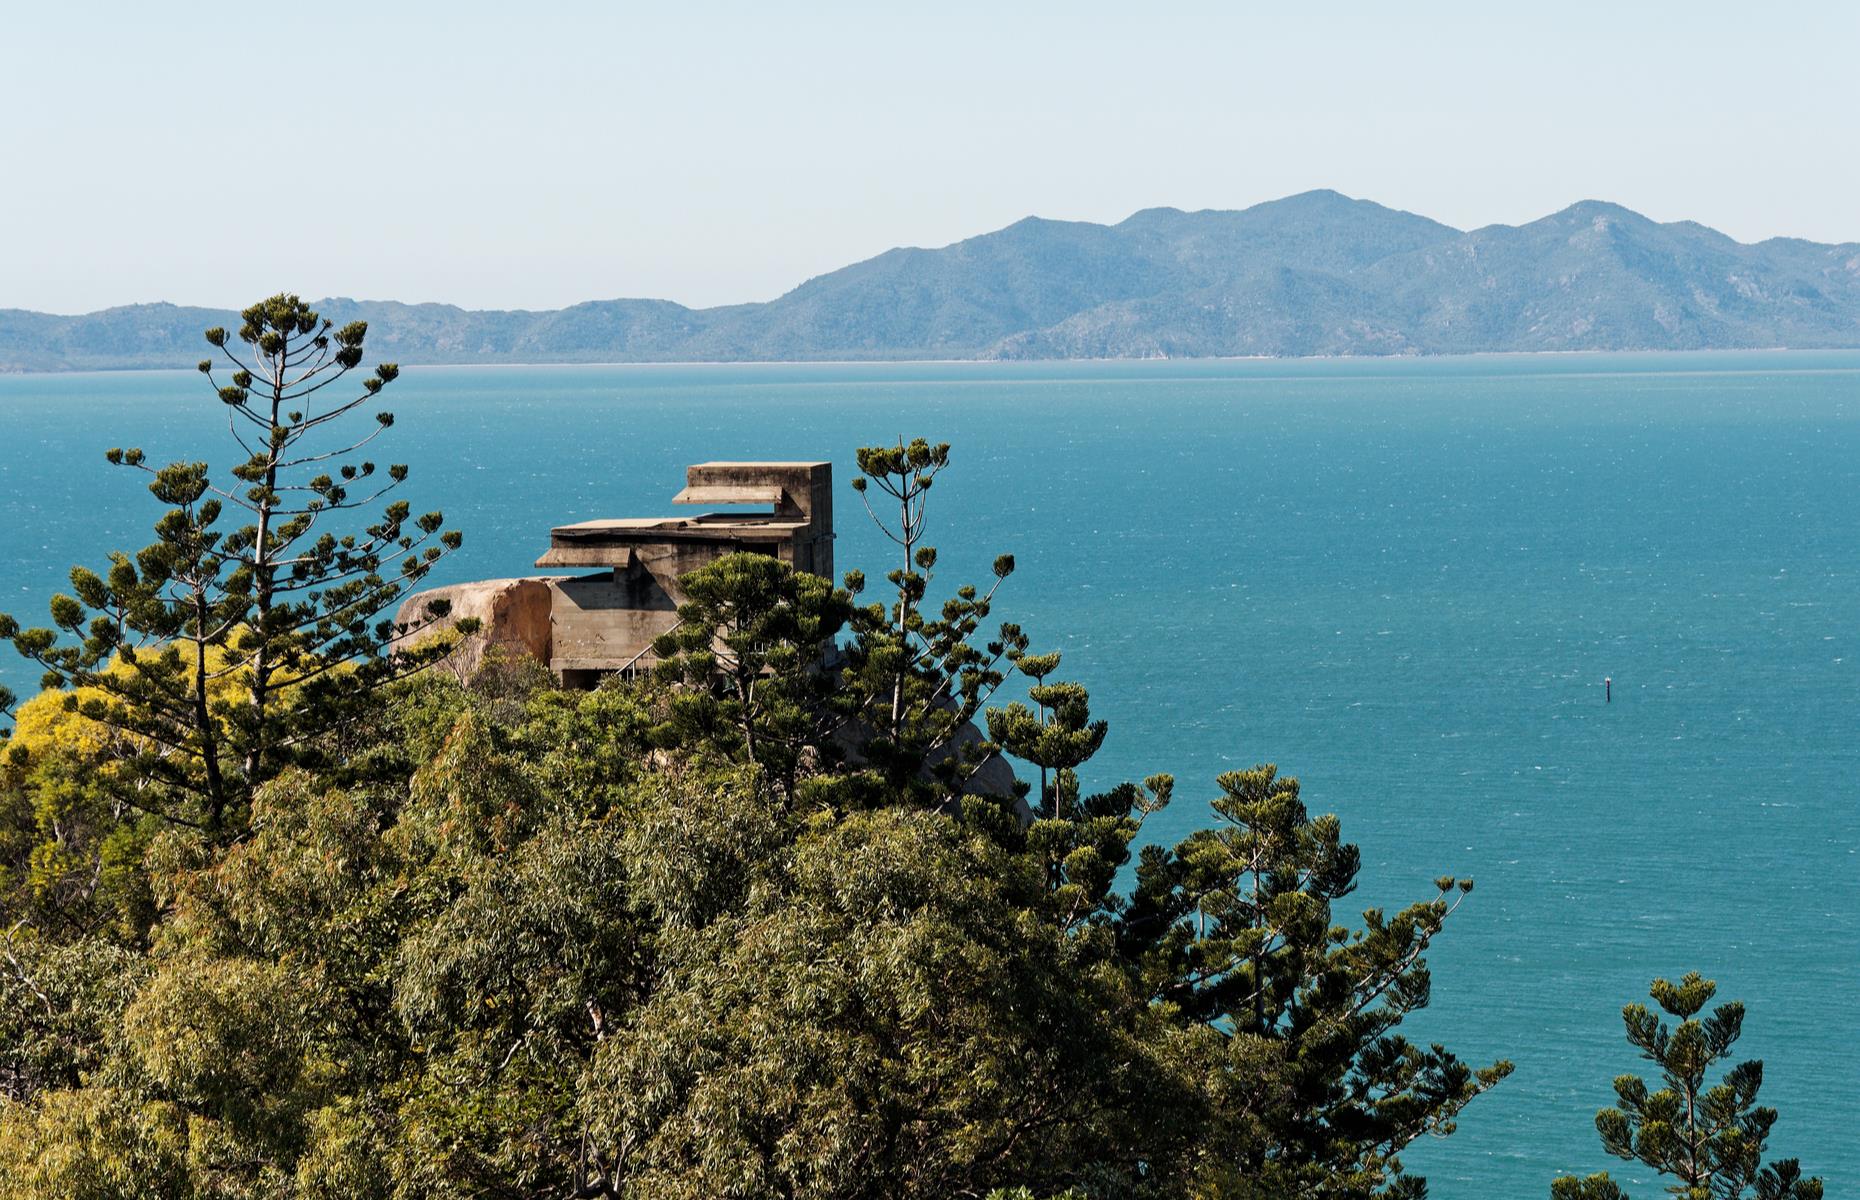 <p>It’s not just the beaches and thriving population of koalas that captivates walker on Queensland's lush Magnetic Island National Park. Its old Second World War fortifications are both fascinating and picturesque and can be explored on <a href="https://parks.des.qld.gov.au/parks/magnetic-island/things-to-do#walking">the Forts Walk</a>. The Australian Coast Artillery Units operated the complex from 1943 until the conclusion of the Pacific War in 1945. Today they’re protected under the Queensland Heritage Act 1992 and considered among the best examples of such fortifications in the state.</p>